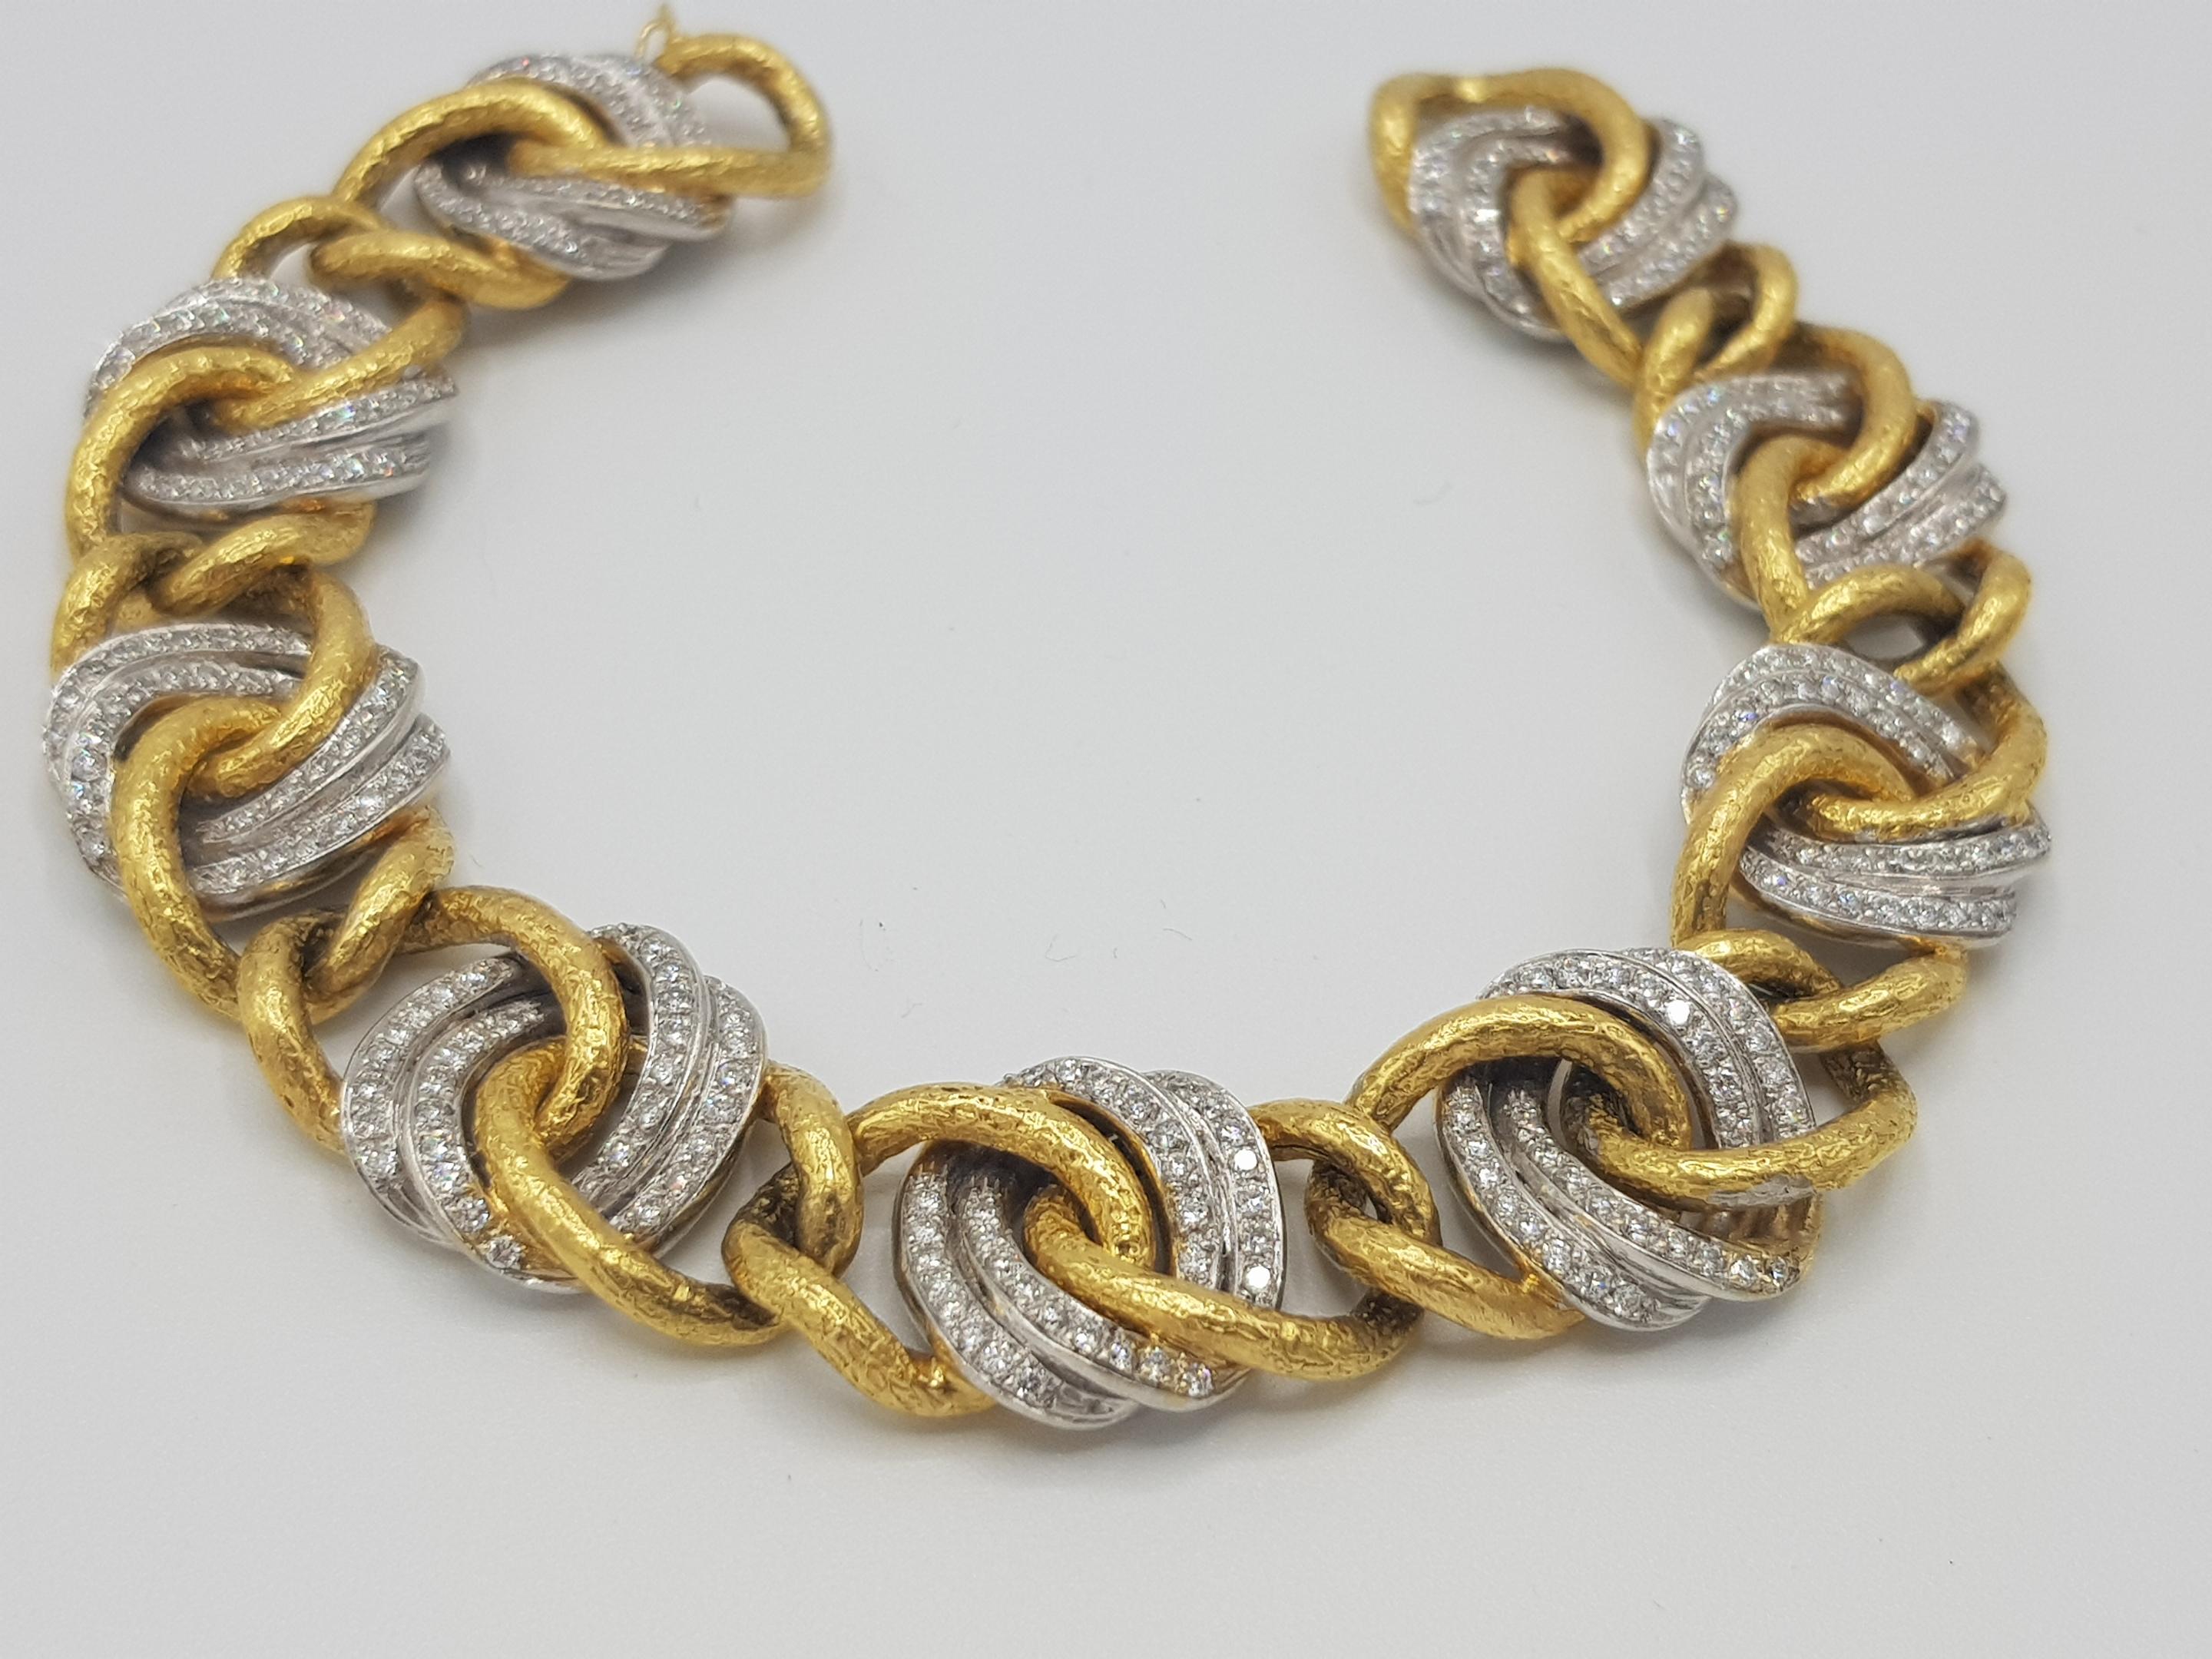 A d'Avossa Bracelet in 18Kt White and Yellow Gold, enriched with white diamonds chains that give this piece a special brightness and a joyful movement.

Unique piece.